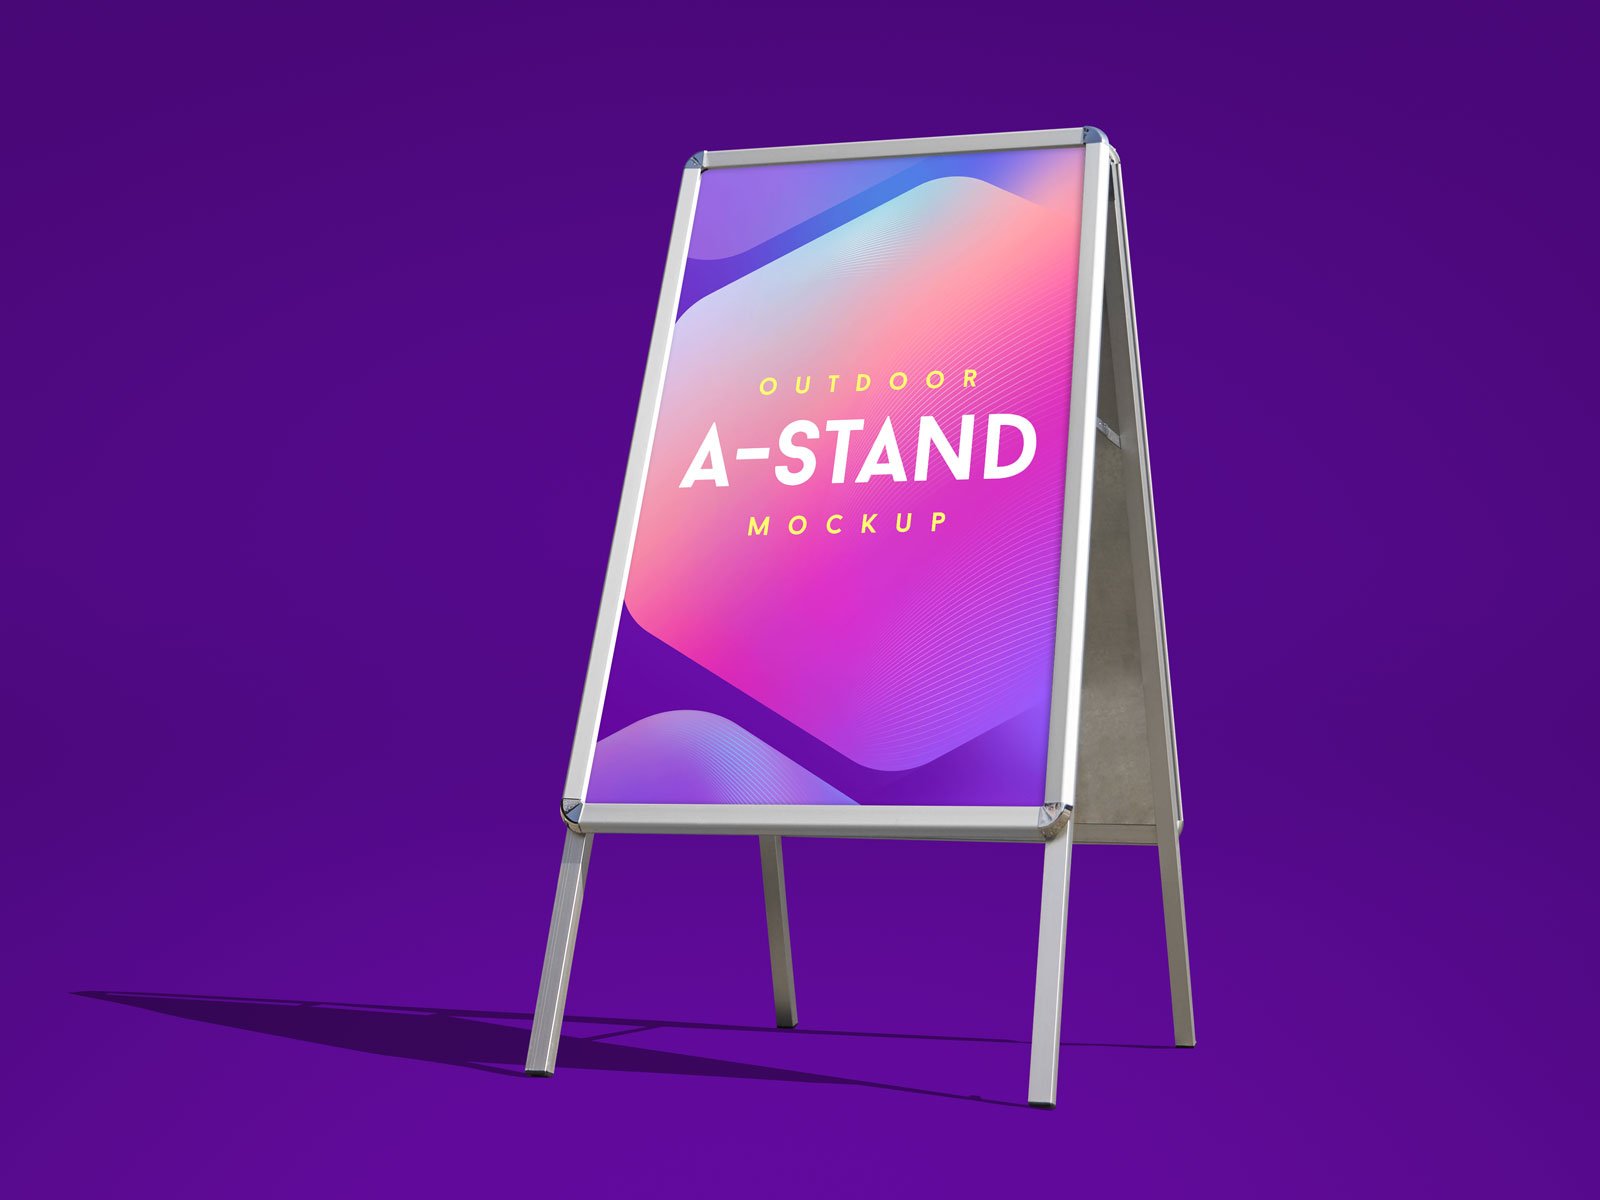 Download Free Outdoor Advertising Foldable A-Stand Mockup PSD ...